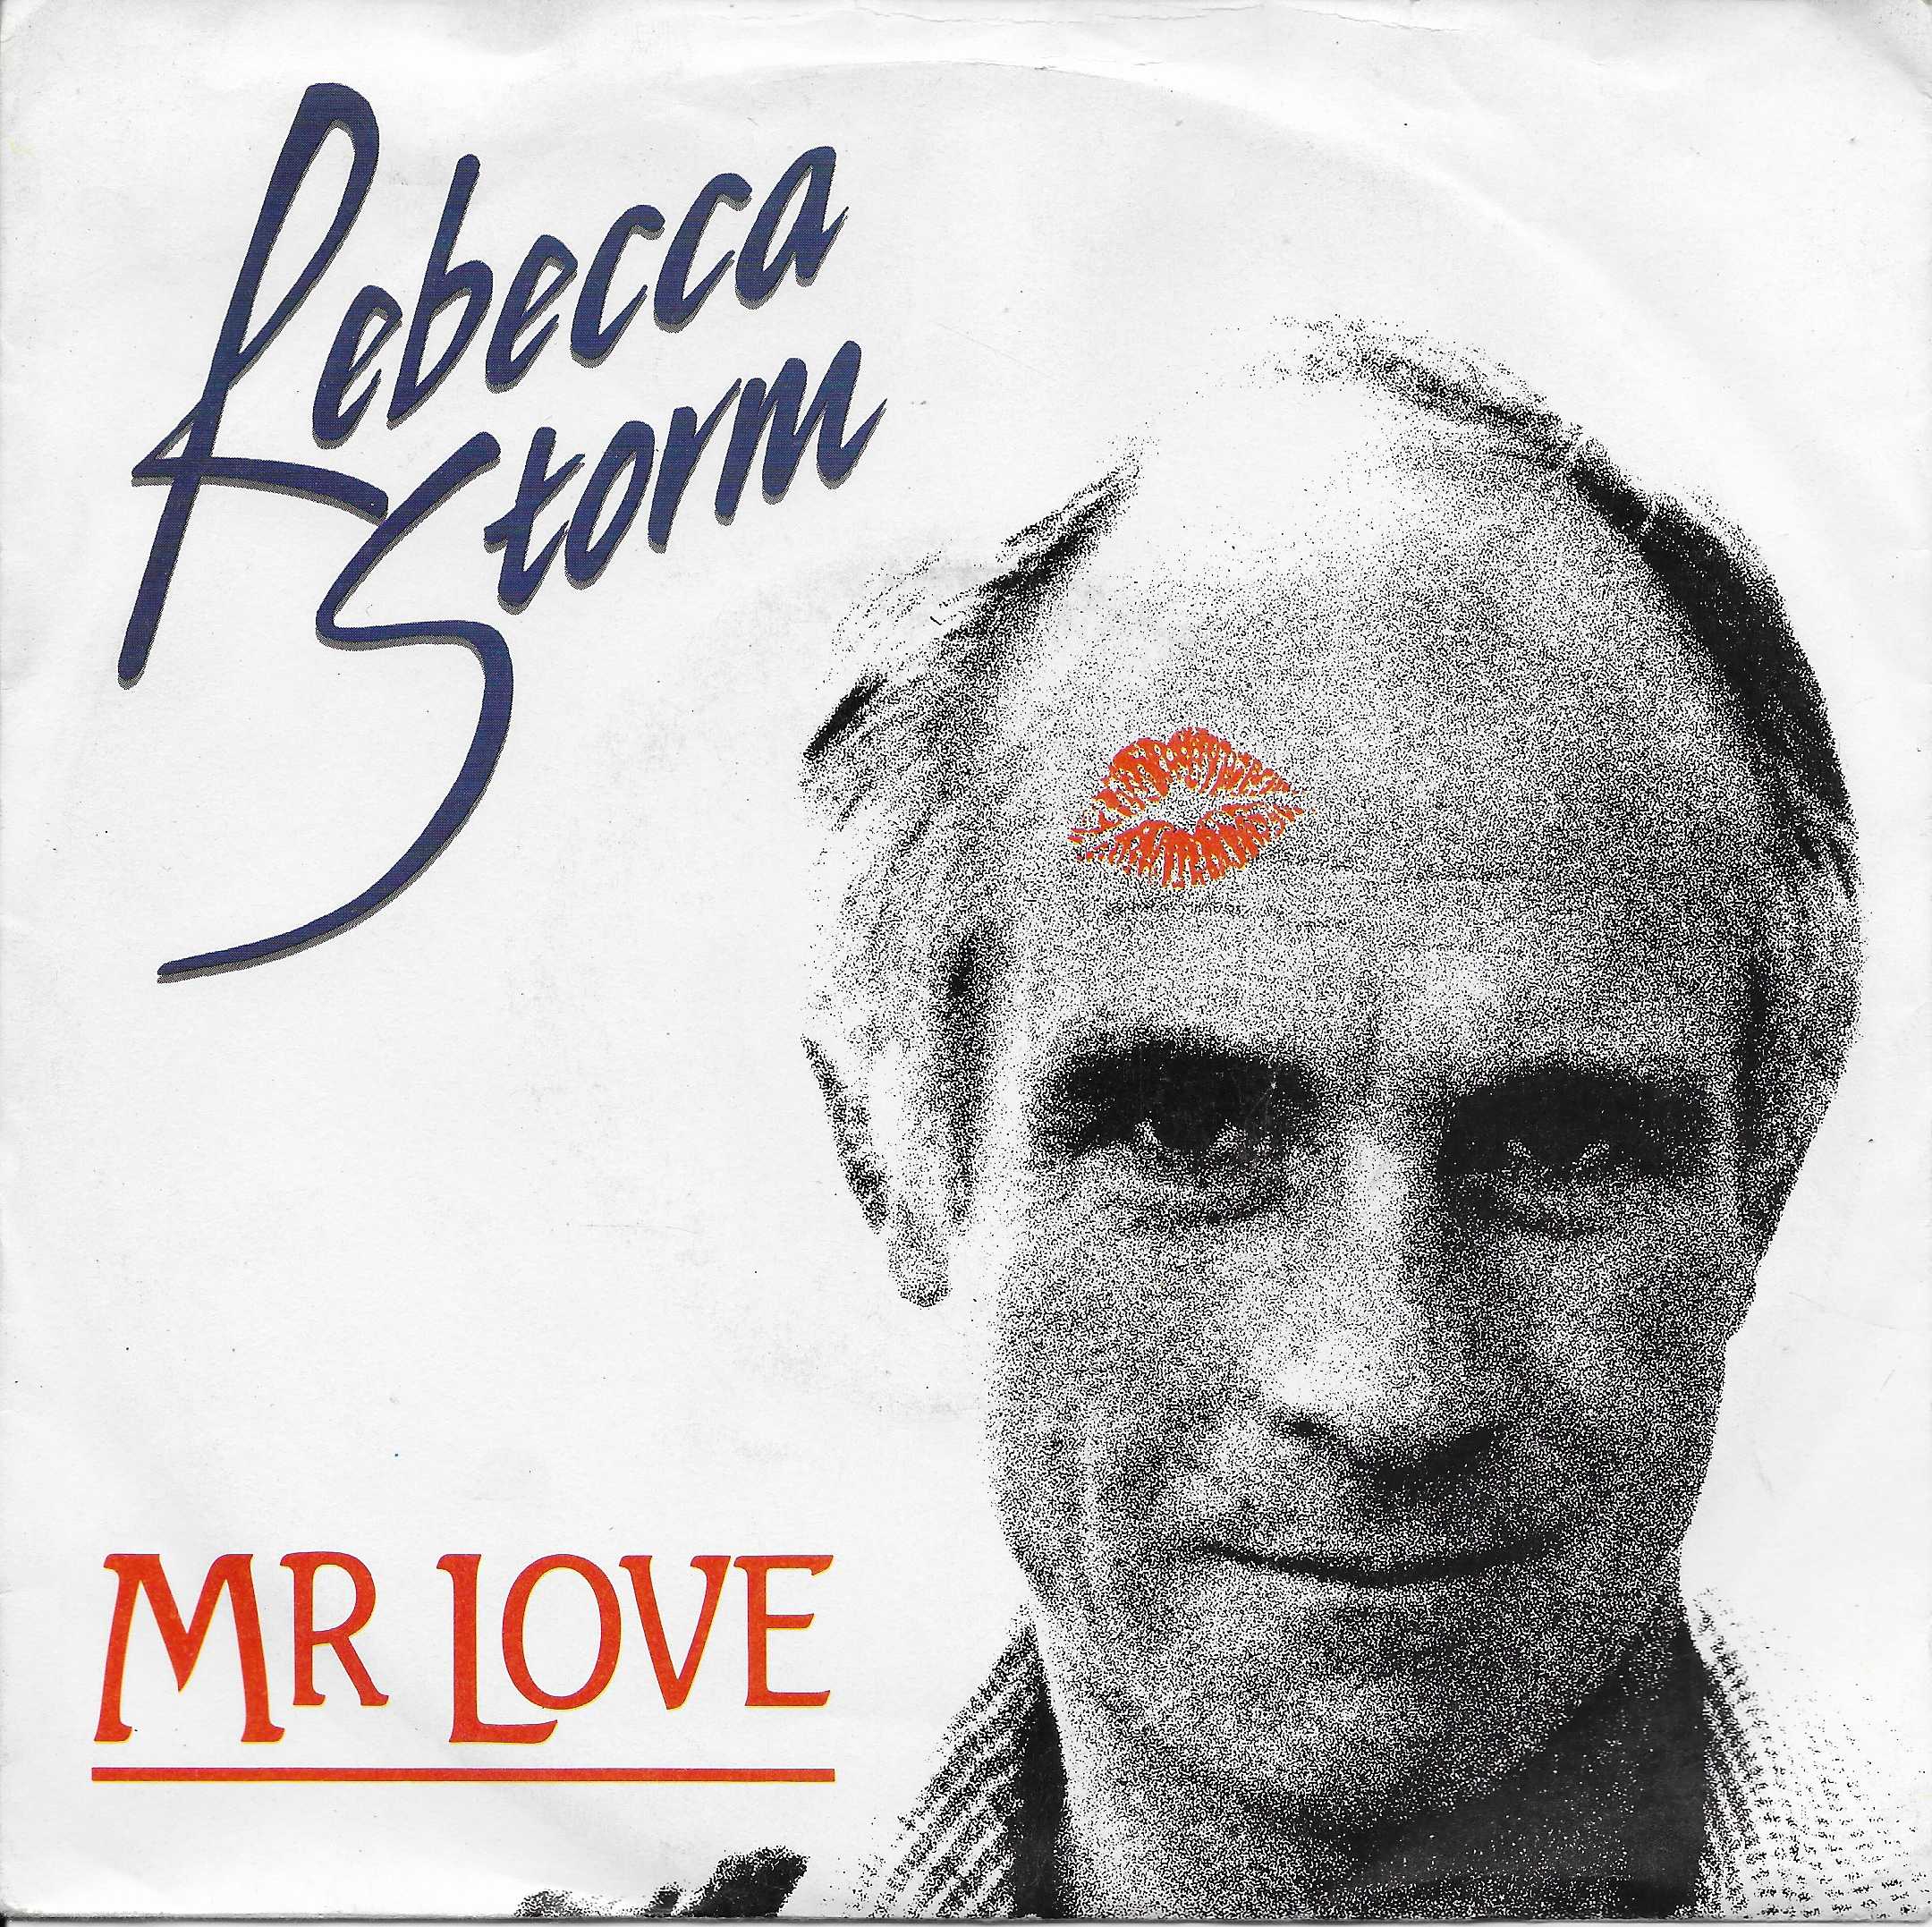 Picture of Mr love by artist Willie & Ruth Russell / Rebecca Storm from ITV, Channel 4 and Channel 5 singles library